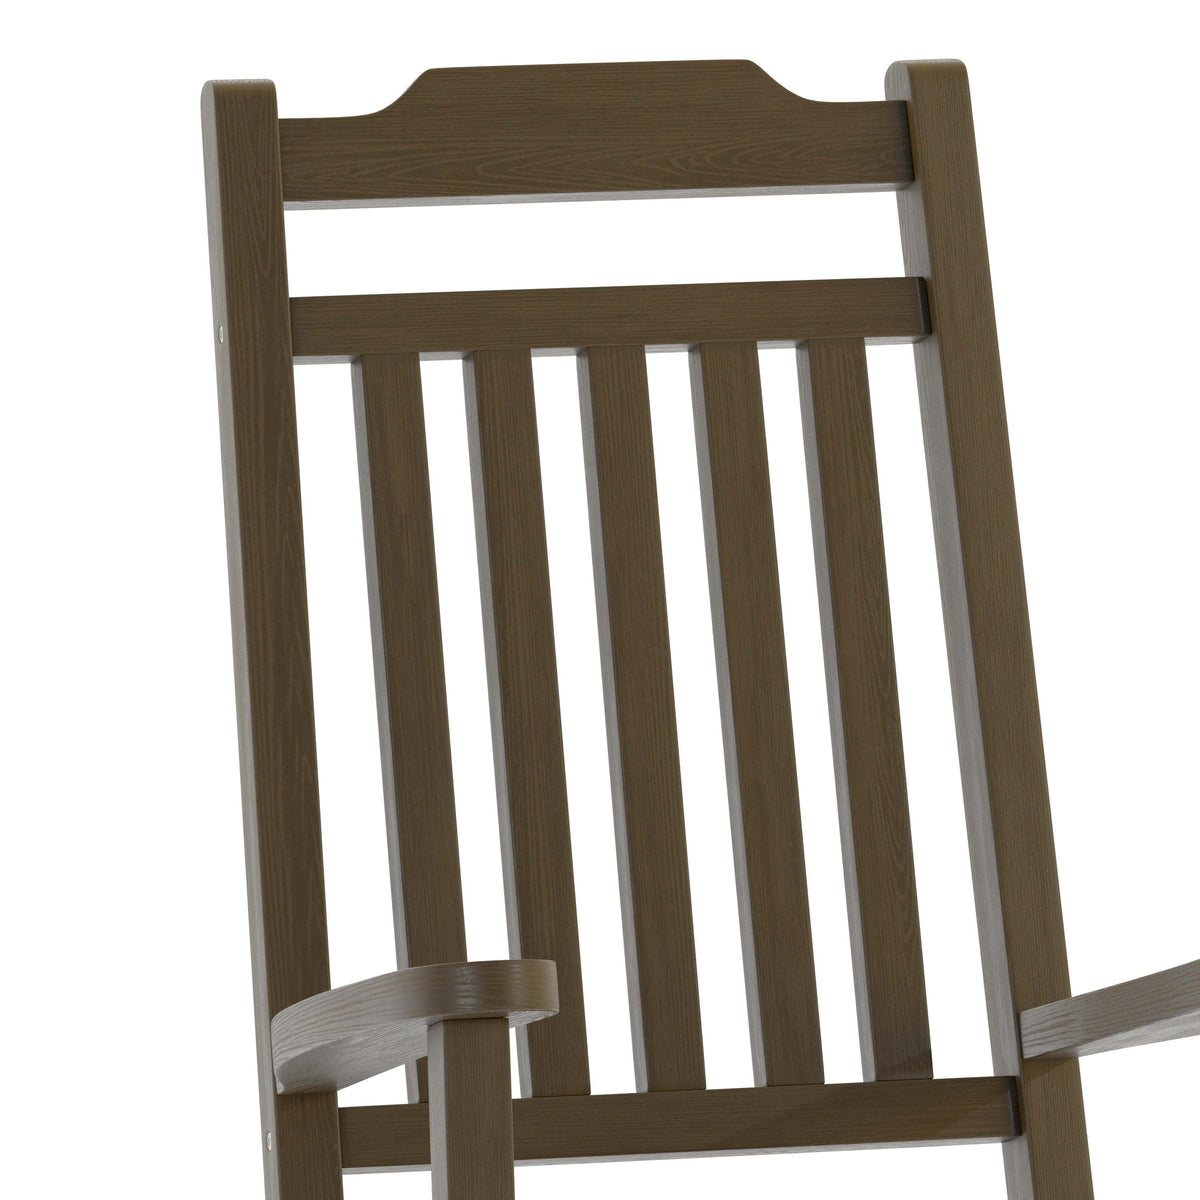 Mahogany |#| Outdoor Patio All-Weather Poly Resin Wood Rocking Chair in Mahogany